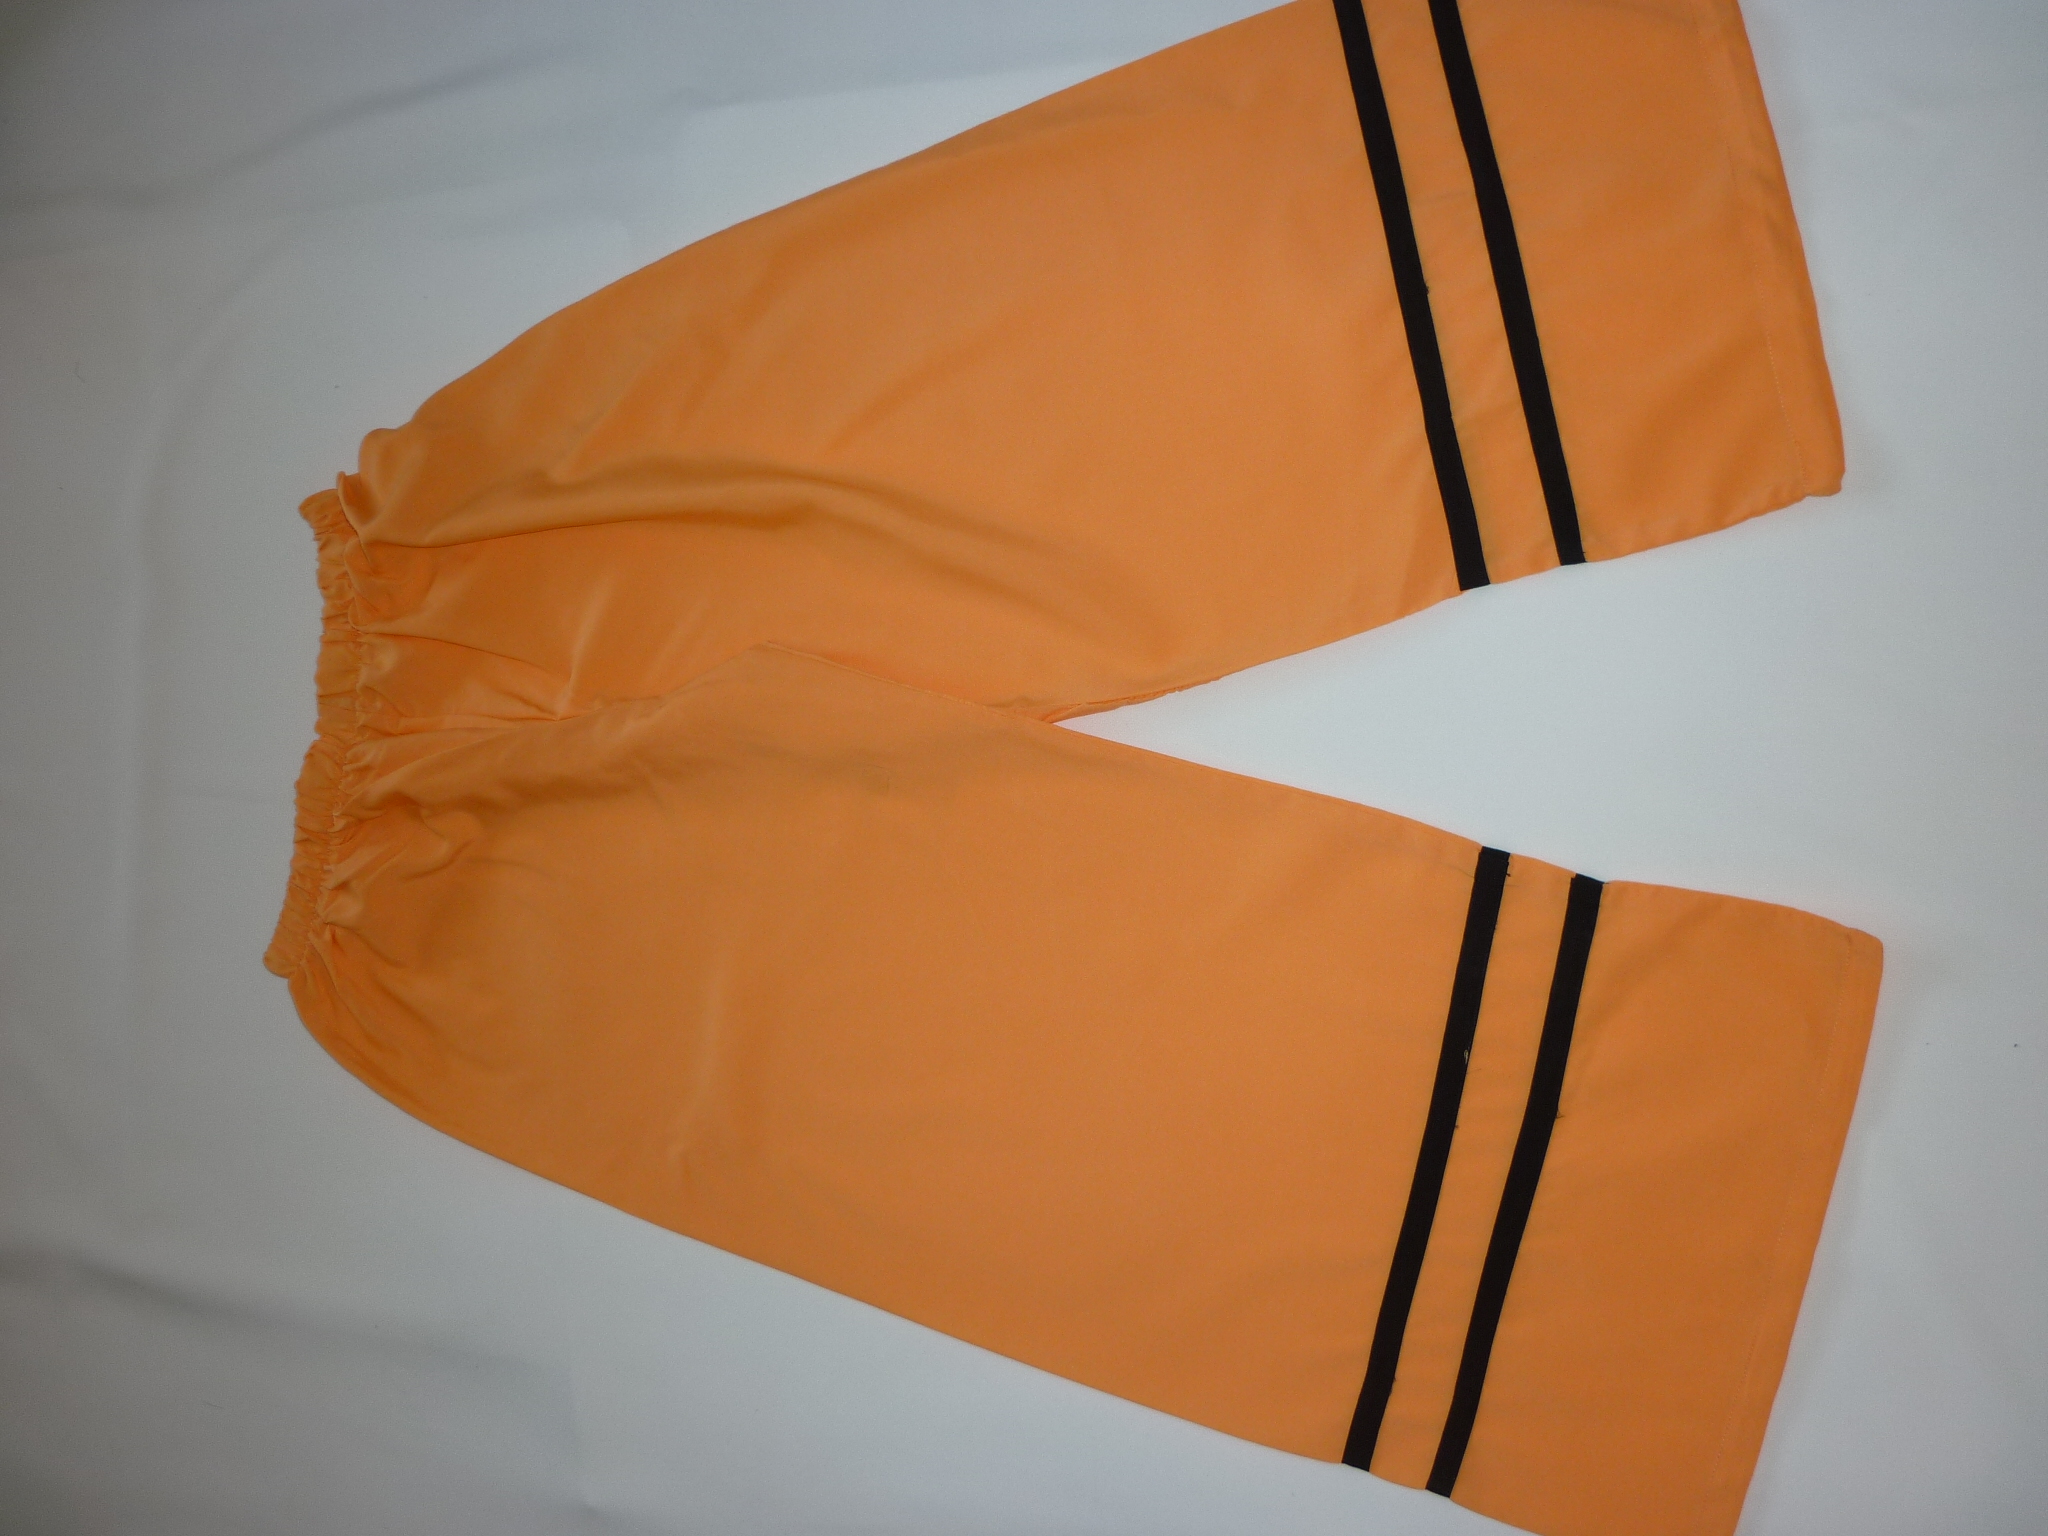 LEGGING FOR GIRLS-ORANGE -LARGE-FREIGHT FREE-LOWEST PRICE GUARANTEED-TRY ATLEAST  ONCE- DO NOT MISS THIS CHANCE-50% DISCOUNT-ART.NO.2005251070715